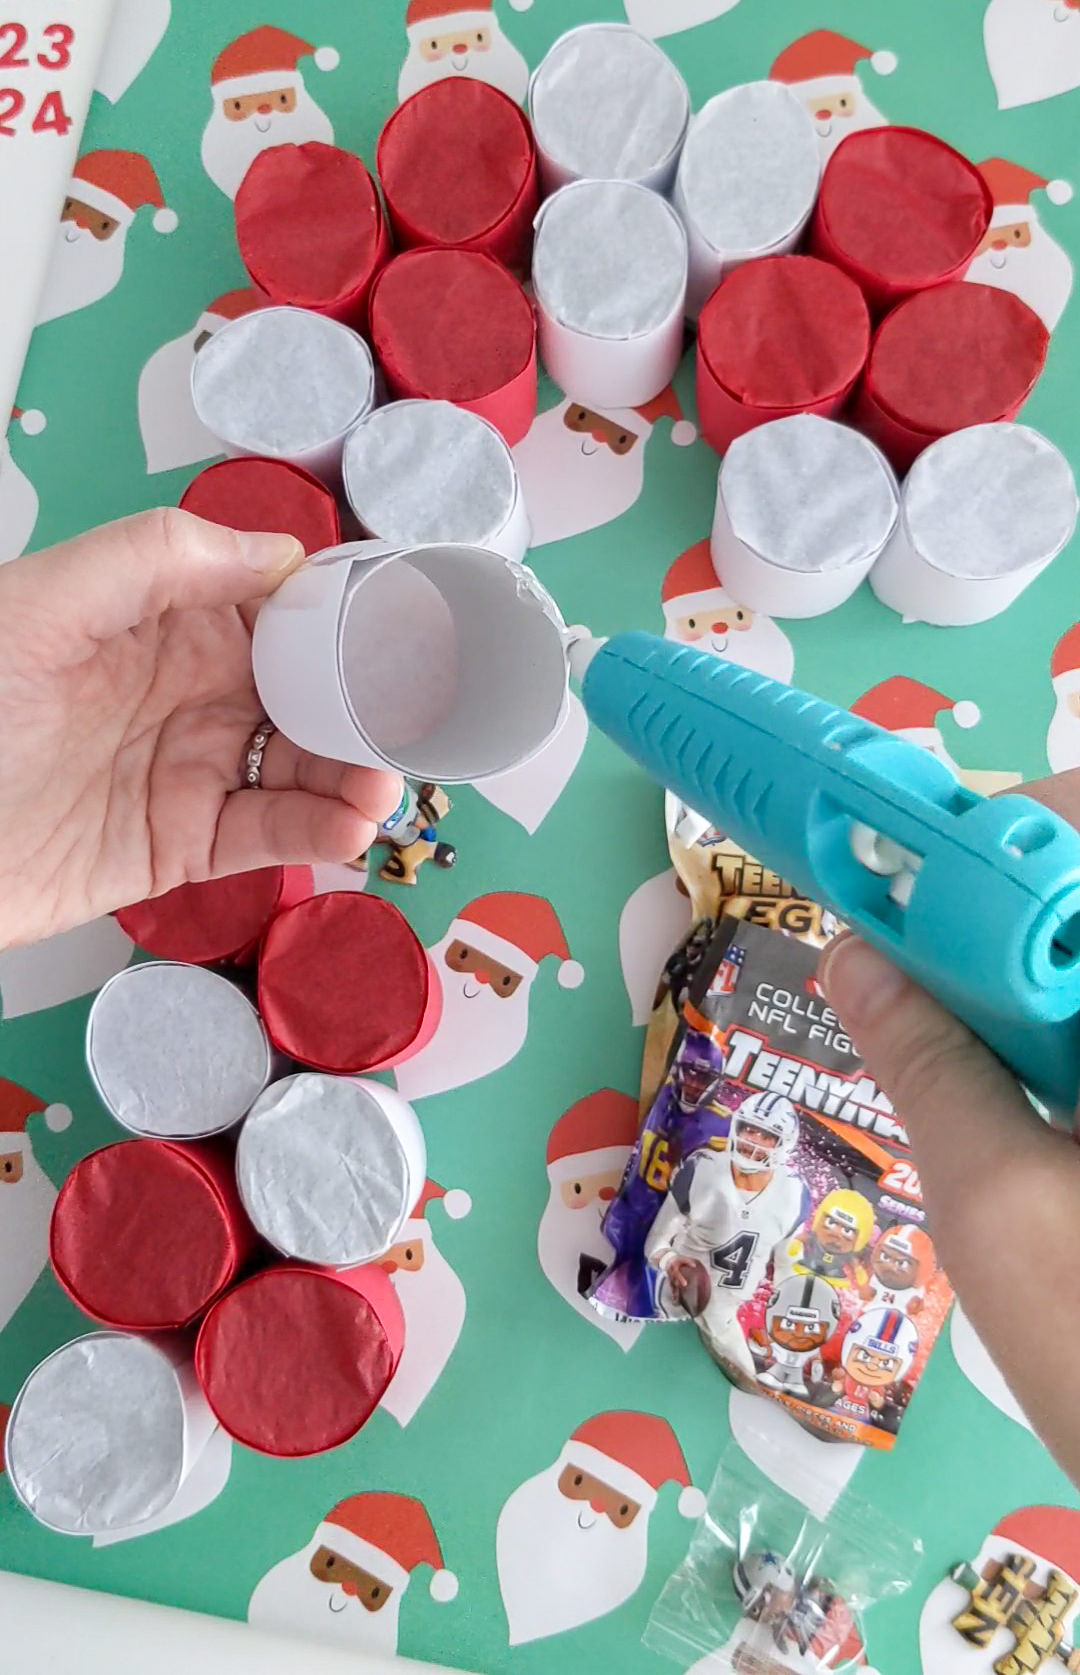 Gluing toilet paper roll tubes to a cardboard base to make a DIY advent calendar for small toys